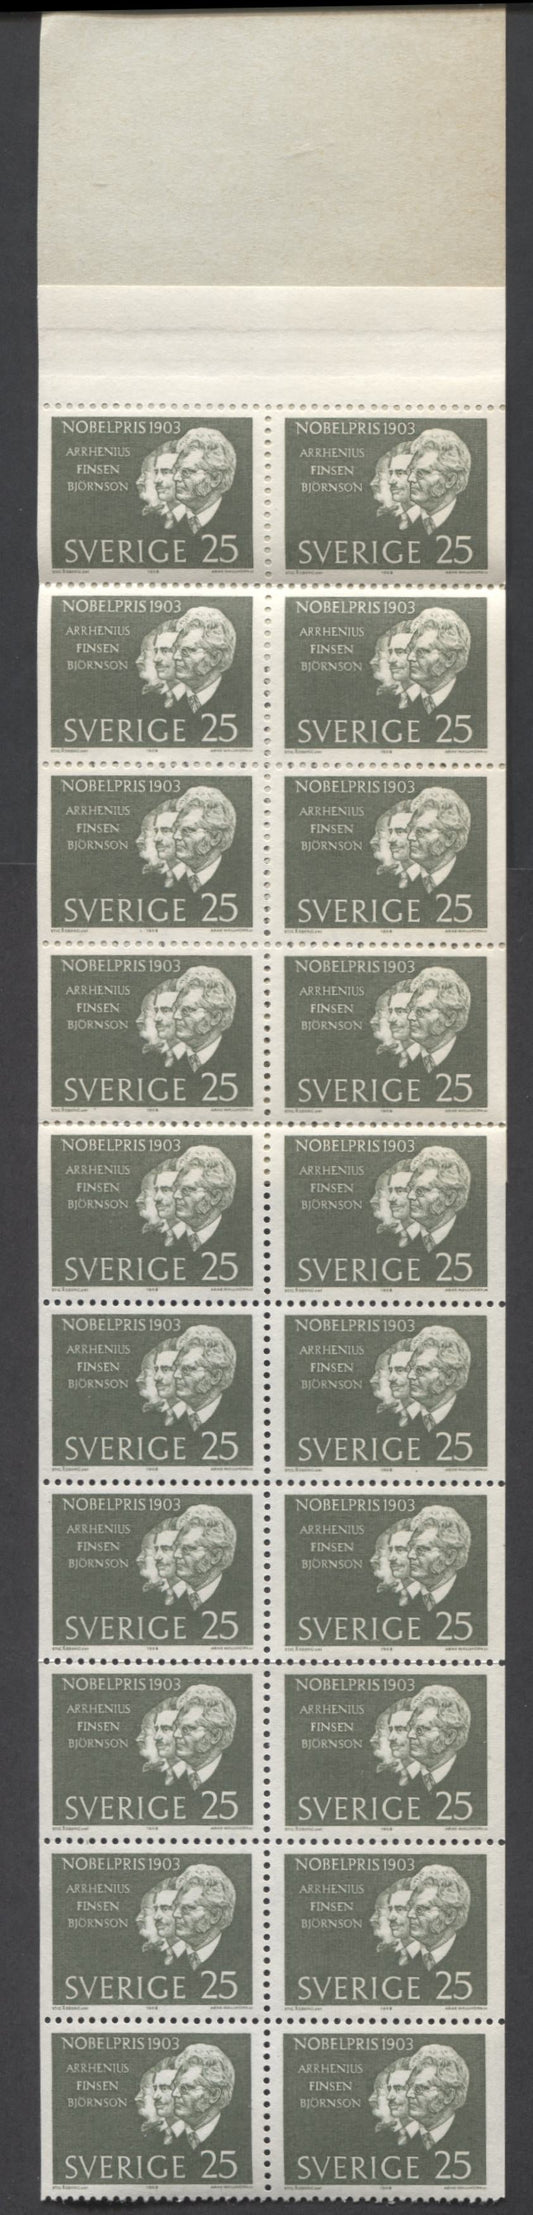 Lot 179 Sweden SC#639a (Facit #H160) 10 Ore, 15 Ore & 25 Ore Brown 1963 Nobel Laureates Issue, A VFNH Booklet of 20, Click on Listing to See ALL Pictures, Estimated Value $20